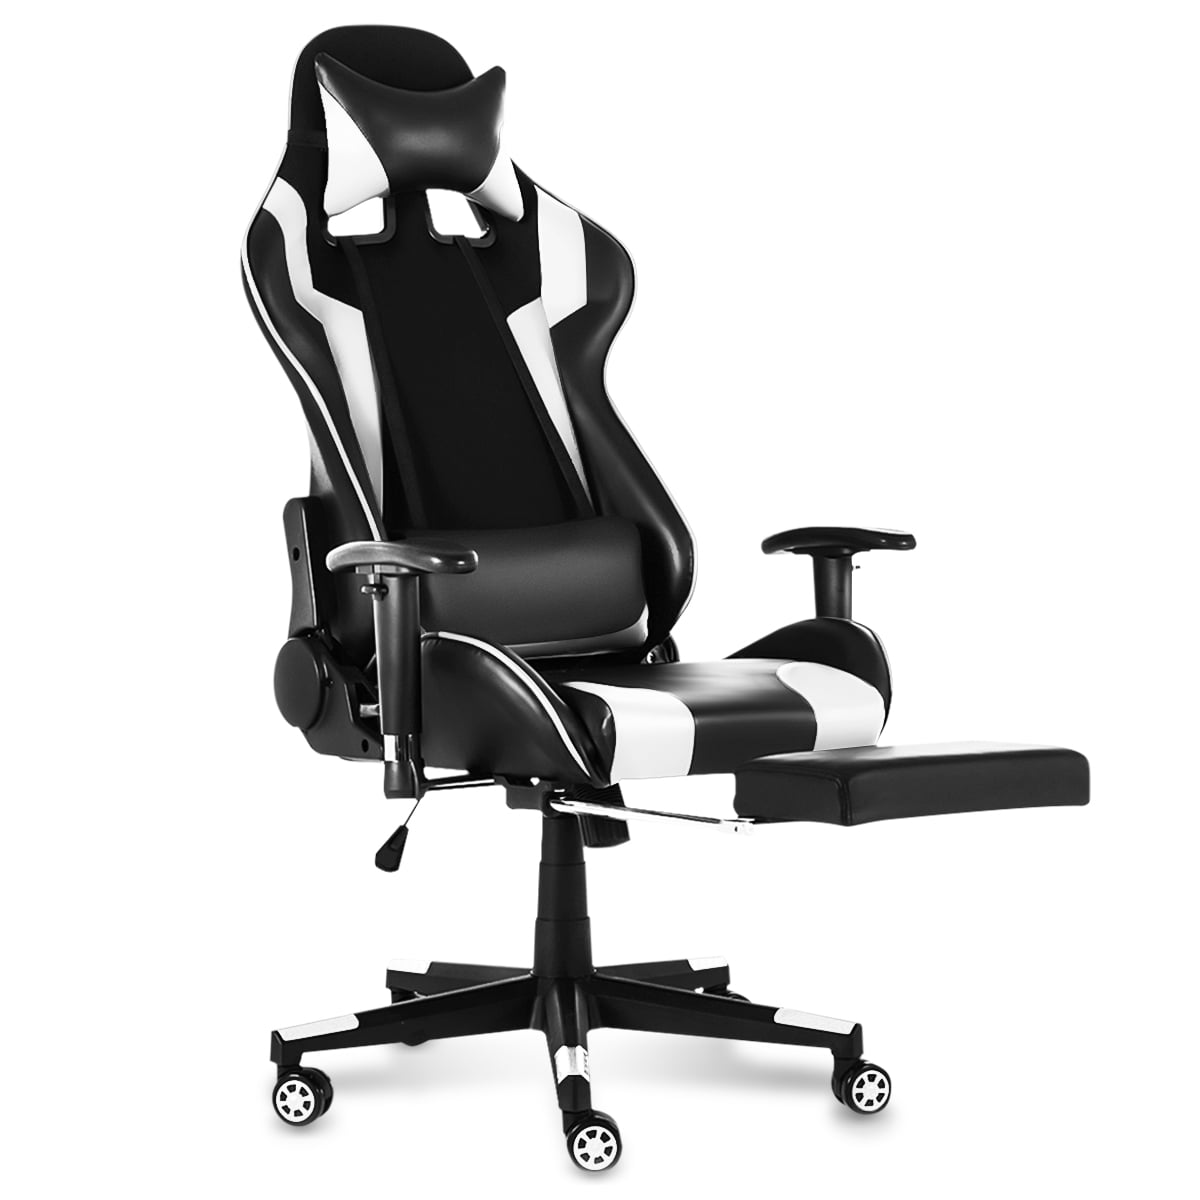 Details about   Gaming Chair Racing Ergonomic Recliner Office Computer Seat Swivel high back 